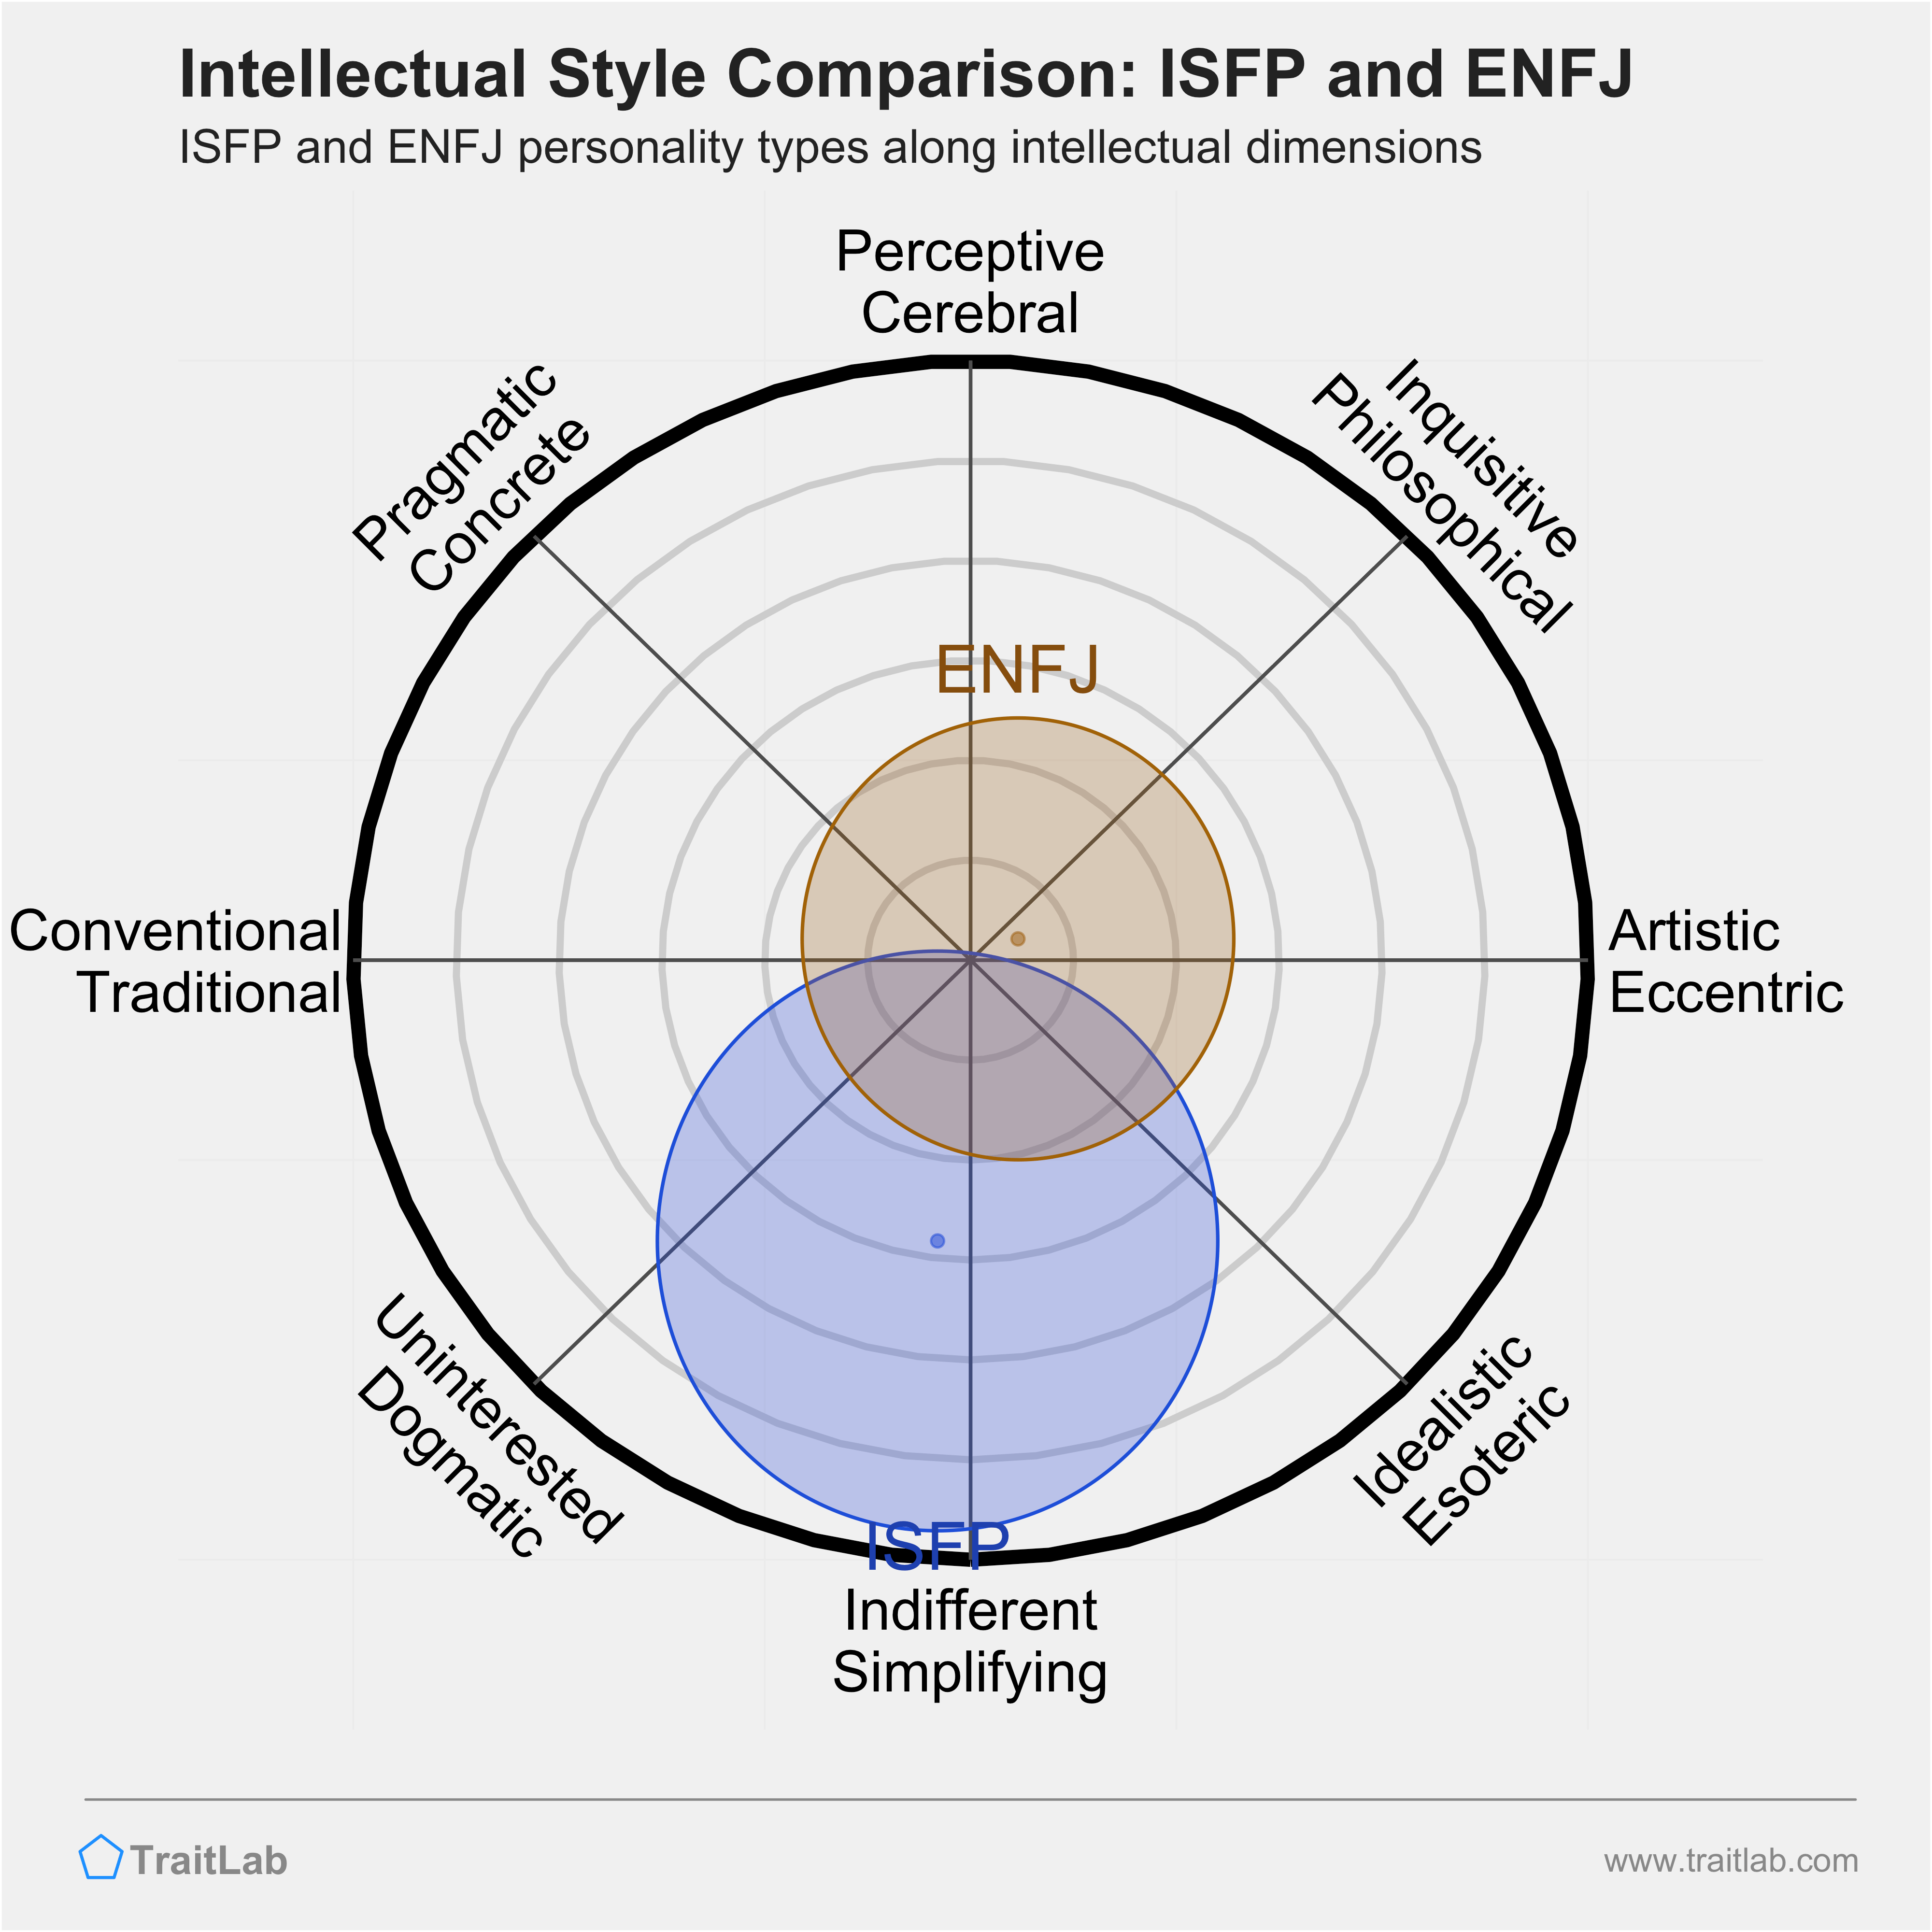 ISFP and ENFJ comparison across intellectual dimensions